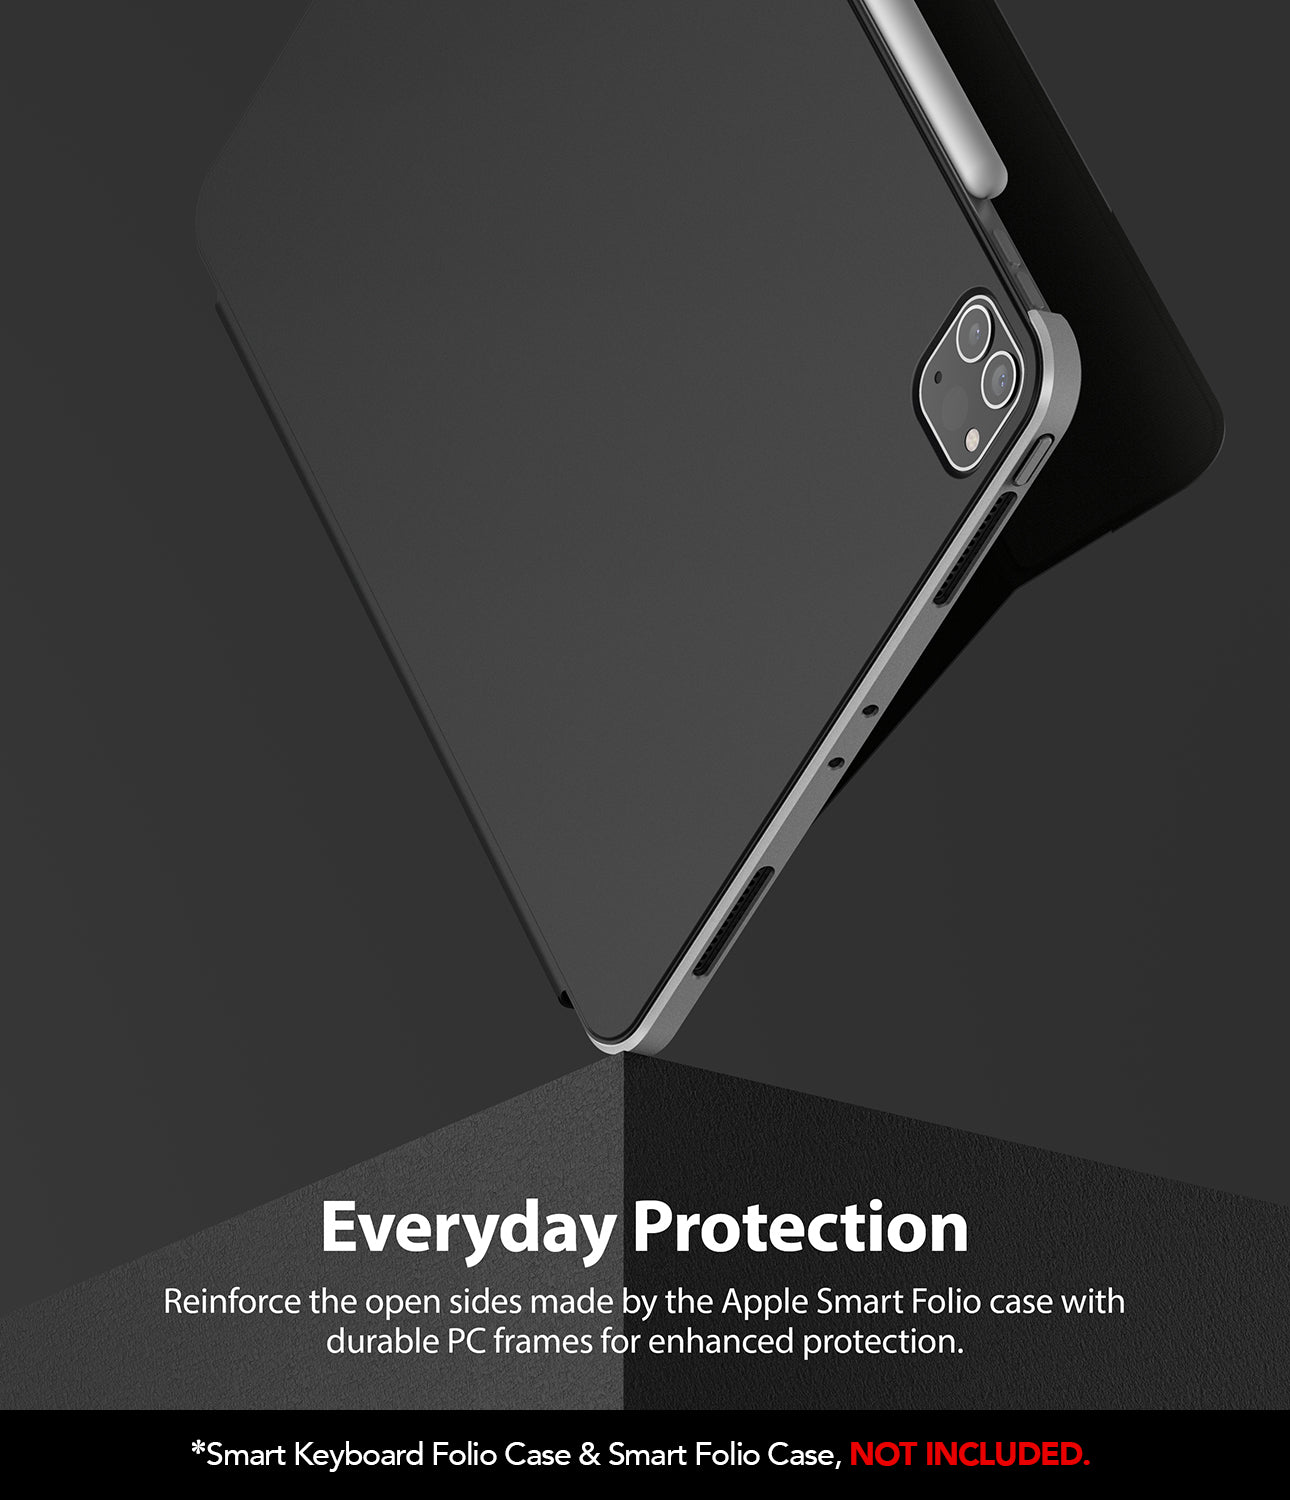 reinforce the open sides made by the apple smart folio case with durable pc frames for enhanced protection